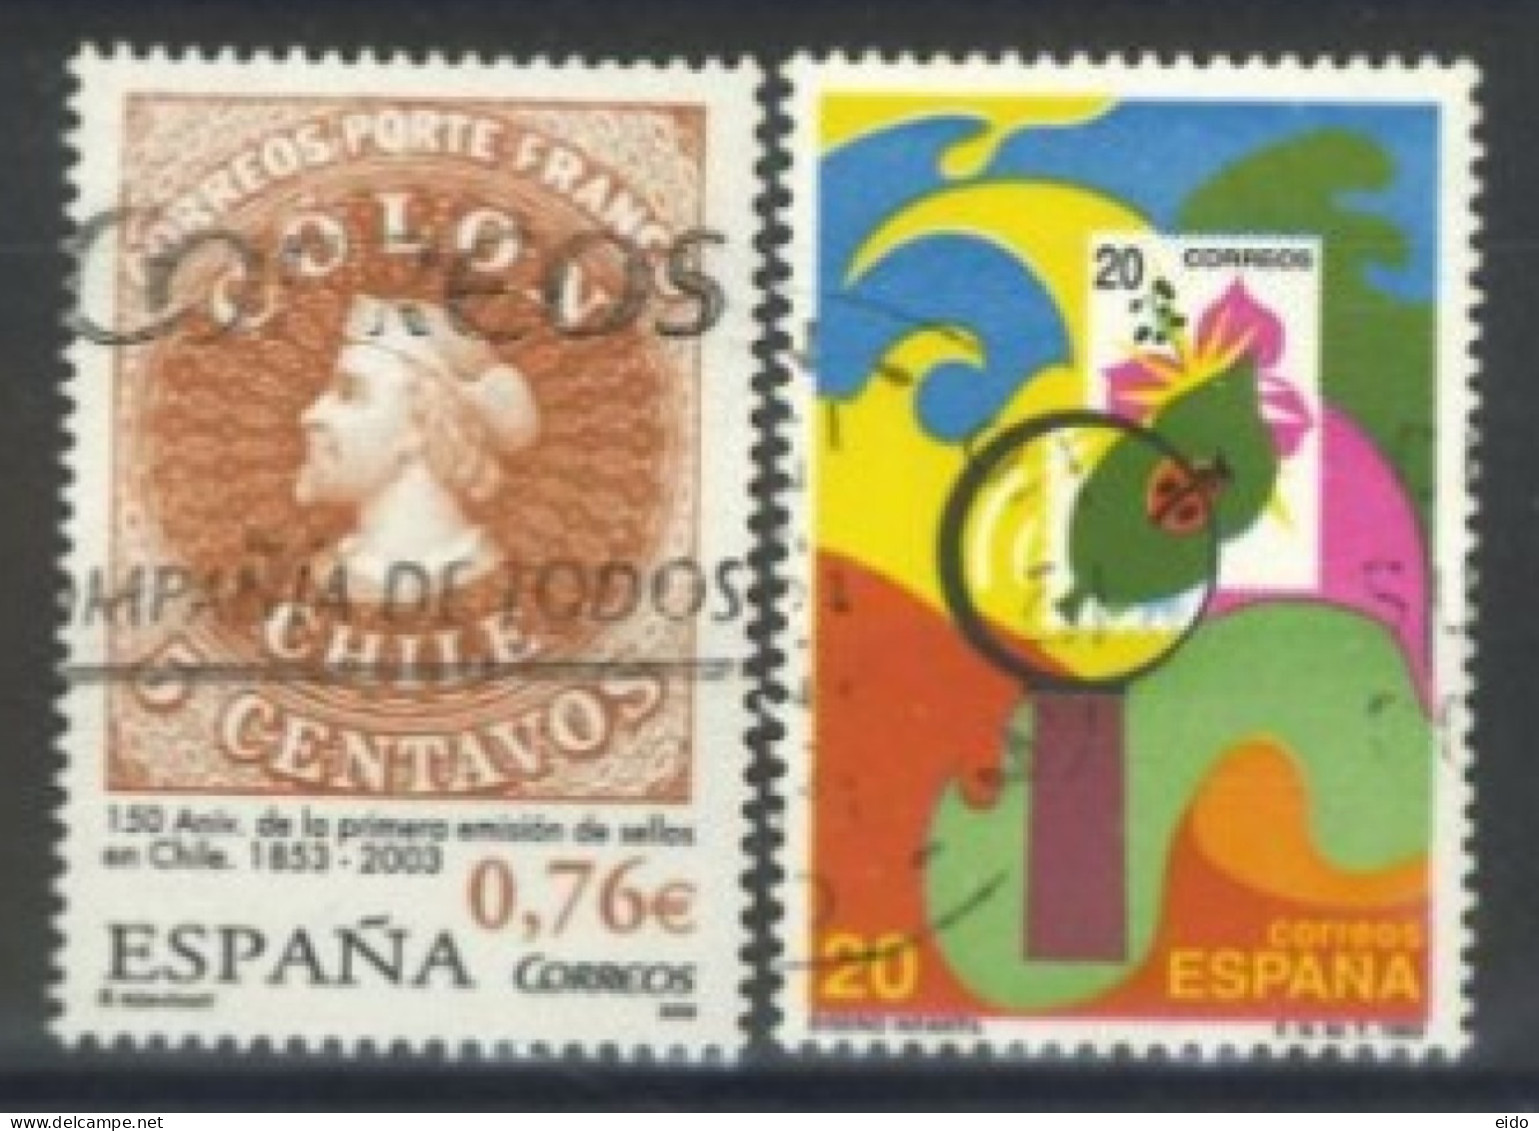 SPAIN,1989/2003, STAMP COLLECTING & CHILEAN POSTAGE STAMPS SET OF 2, # 2592, 3227, USED. - Gebruikt